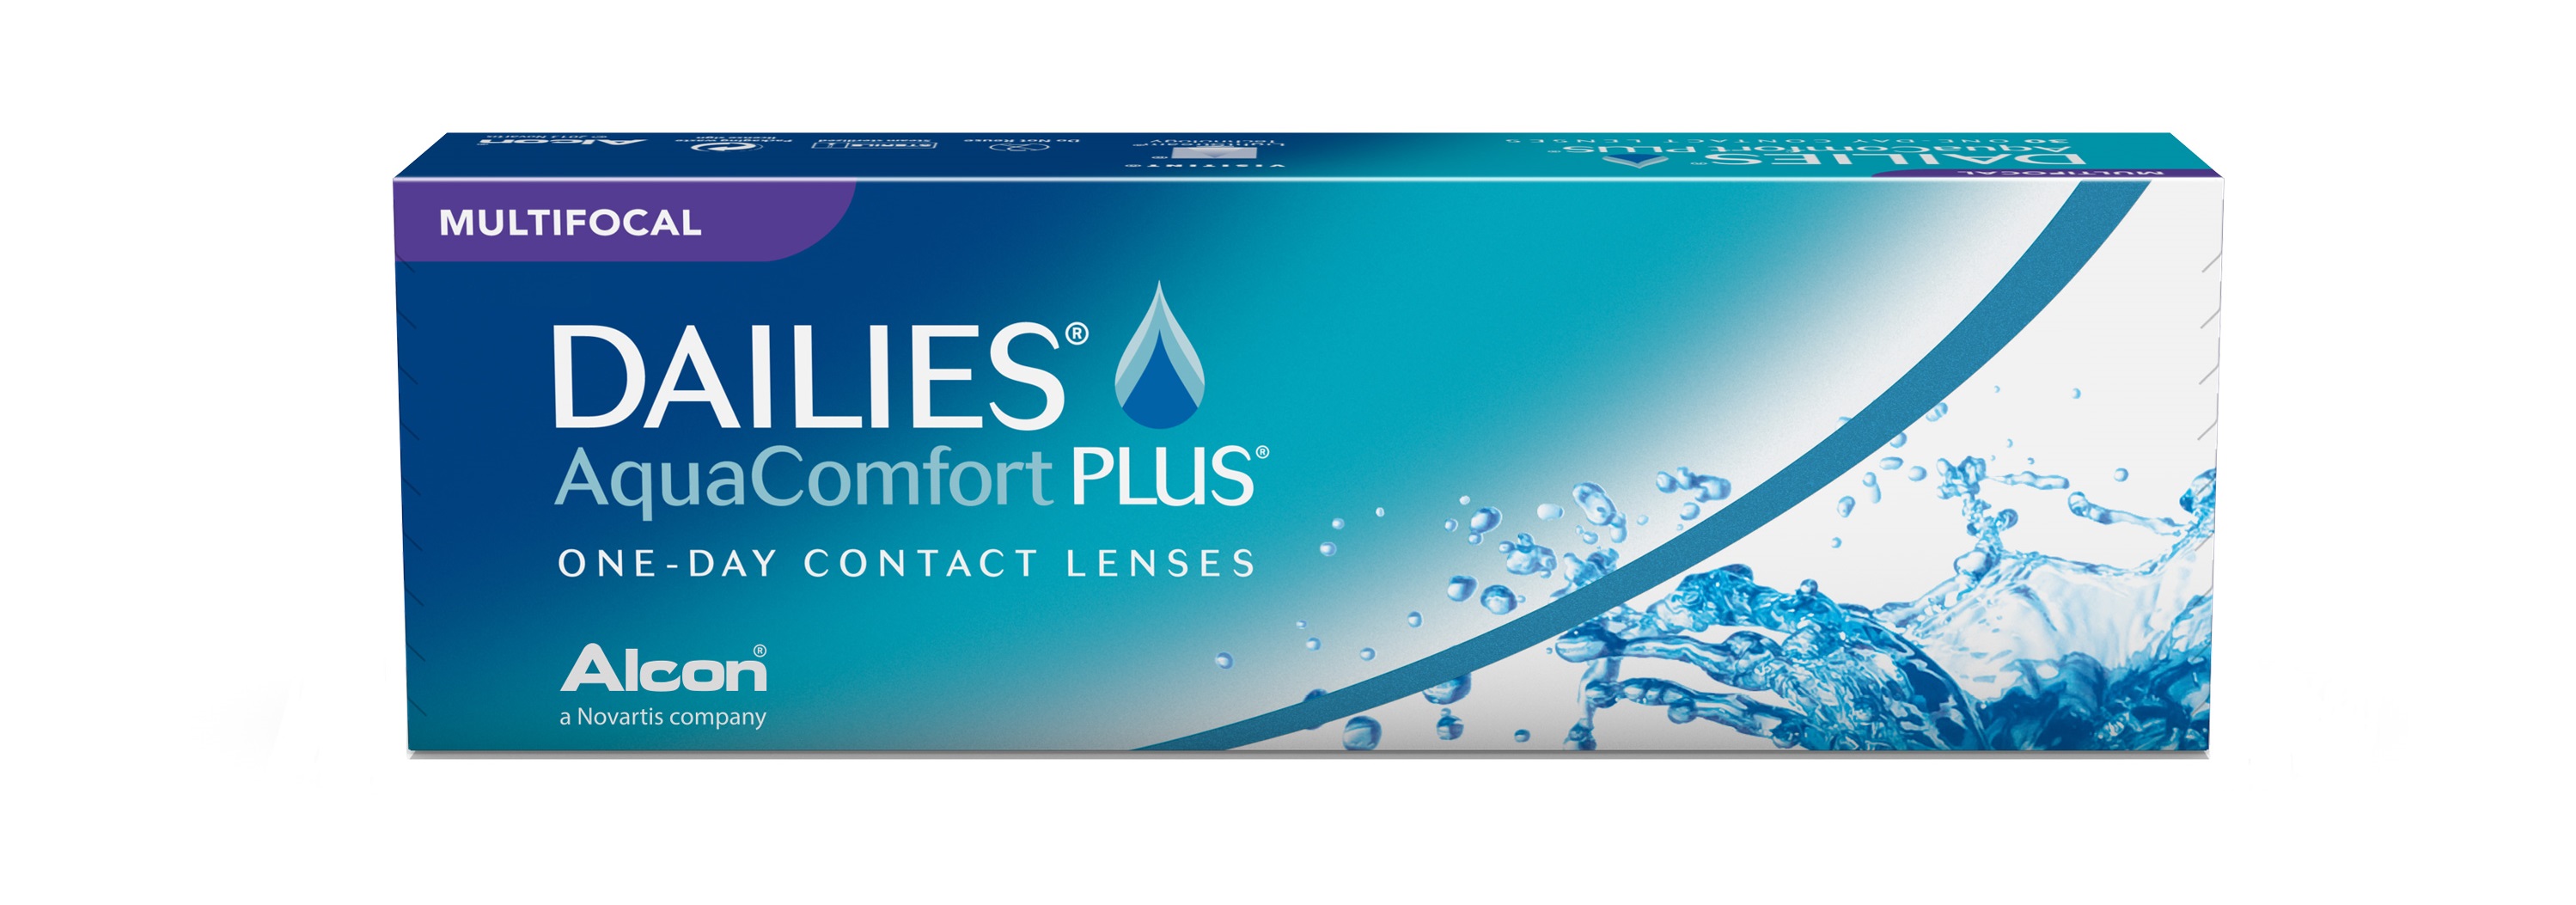 DAILIES AquaComfort PLUS MULTIFOCAL 30 Pack - High Add large view angle 0